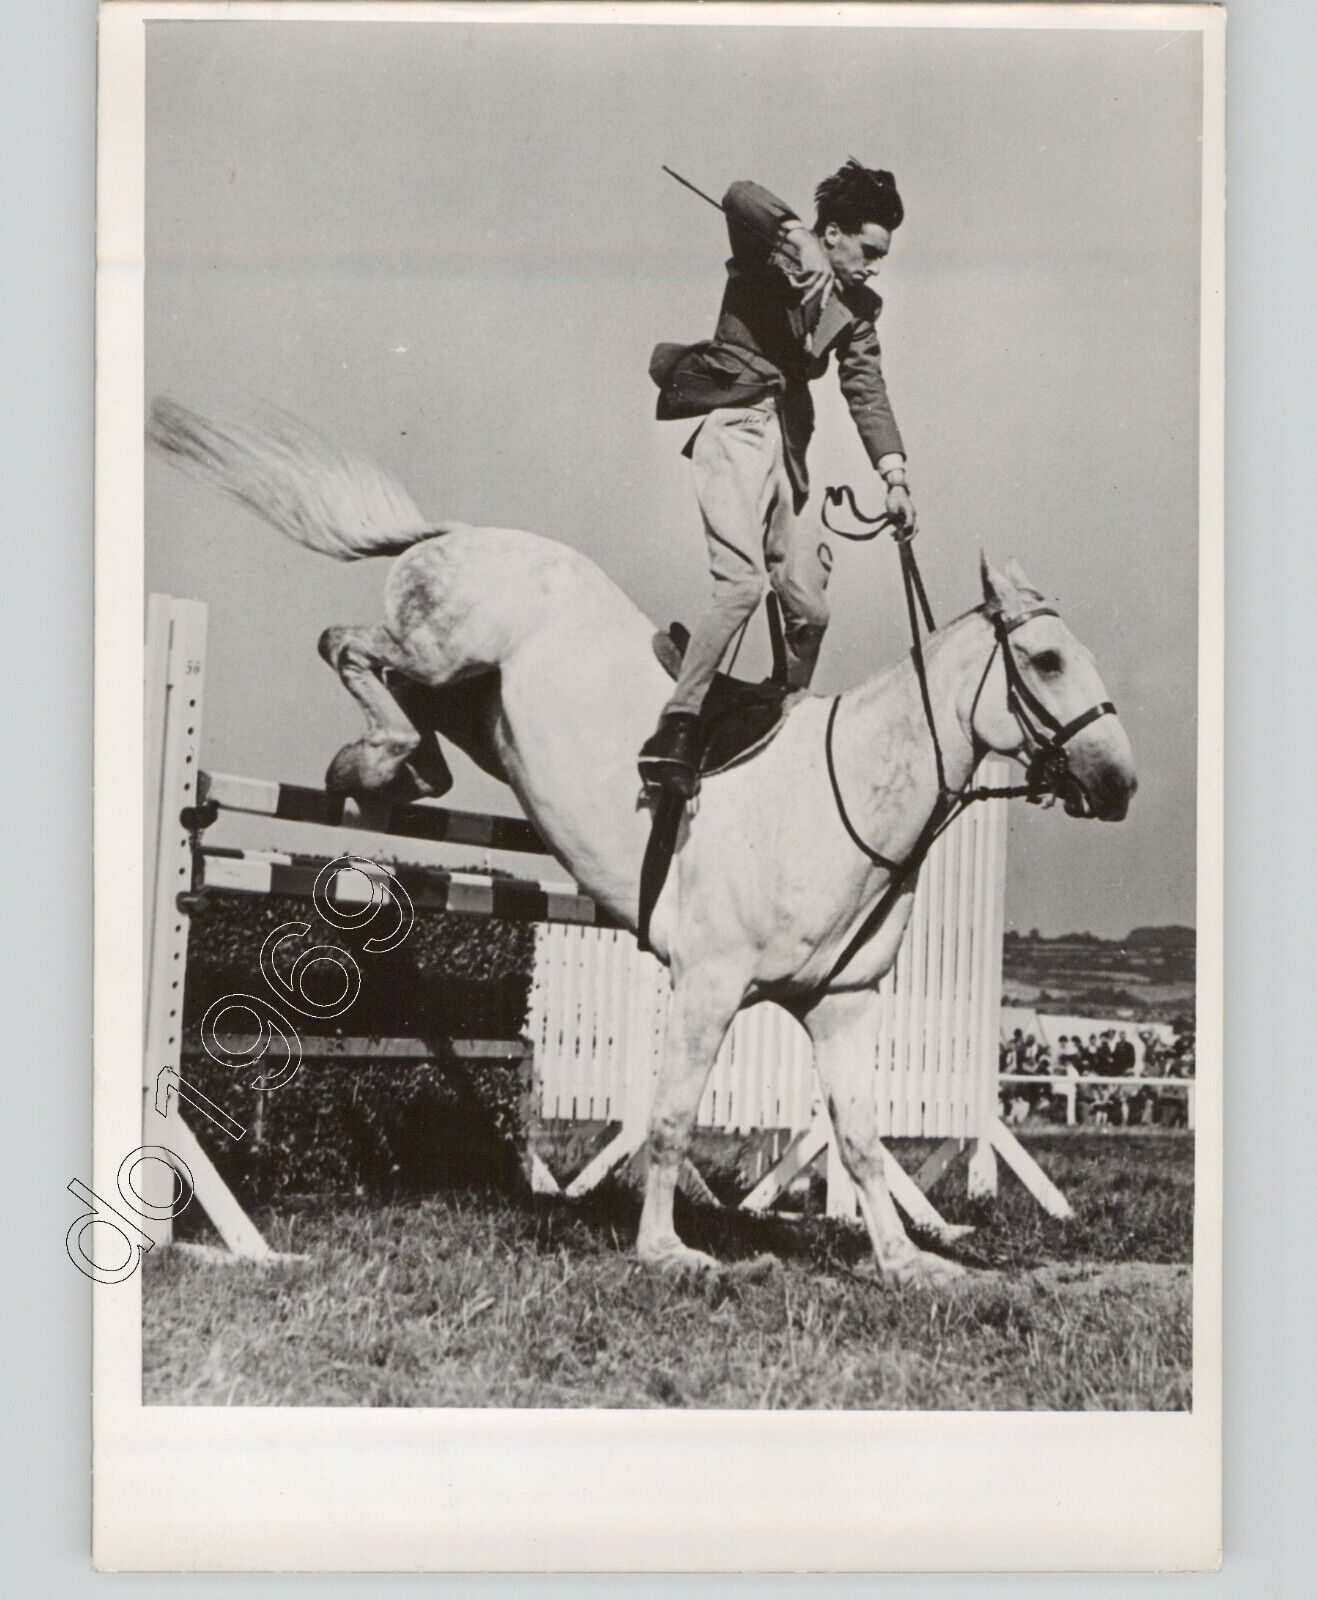 HORSE Performs Jump at EQUESTRIAN Event Germany 1952 Press Photo Sports PIX